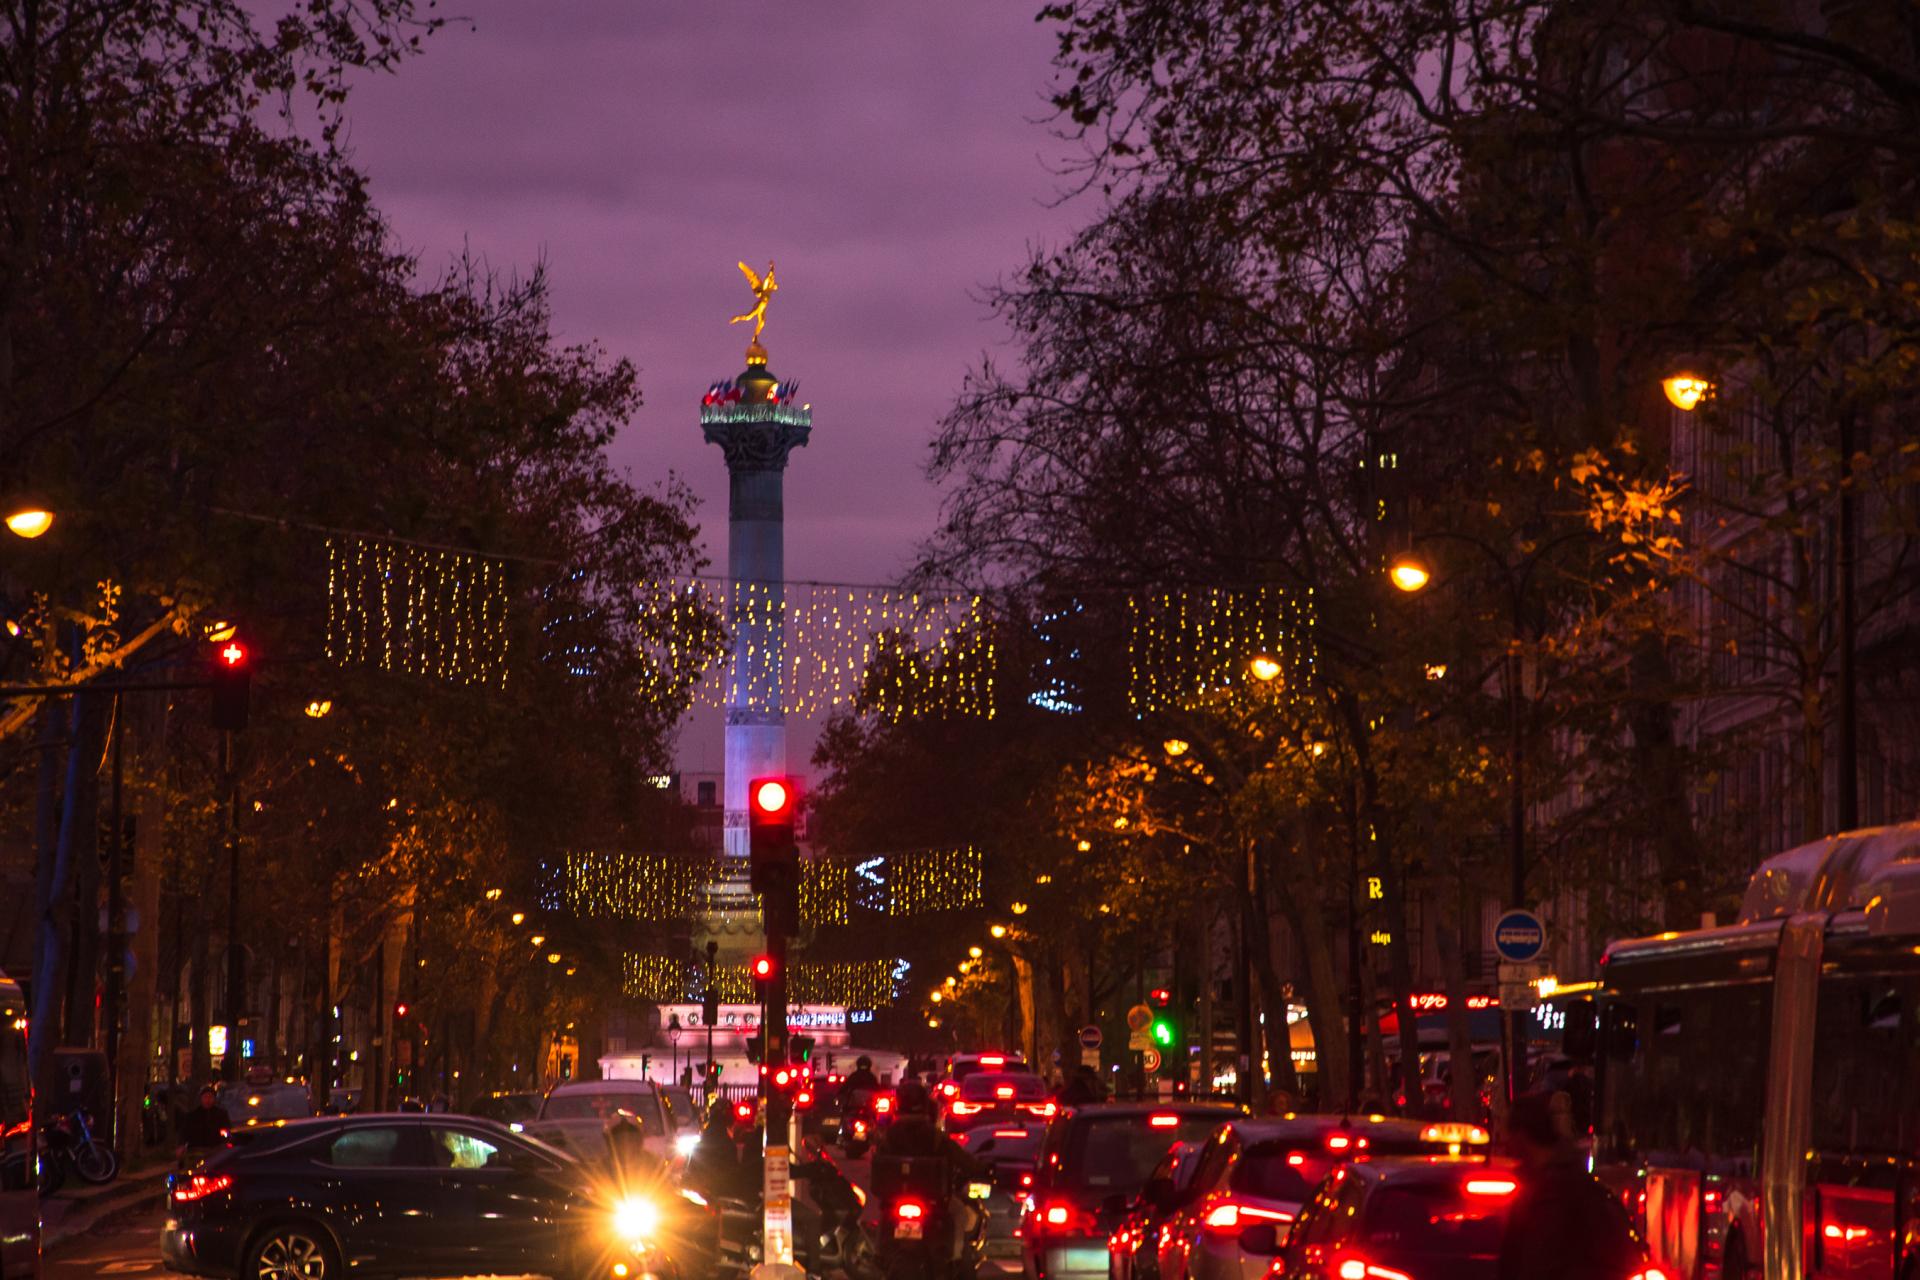 The magic of Christmas takes hold of Paris